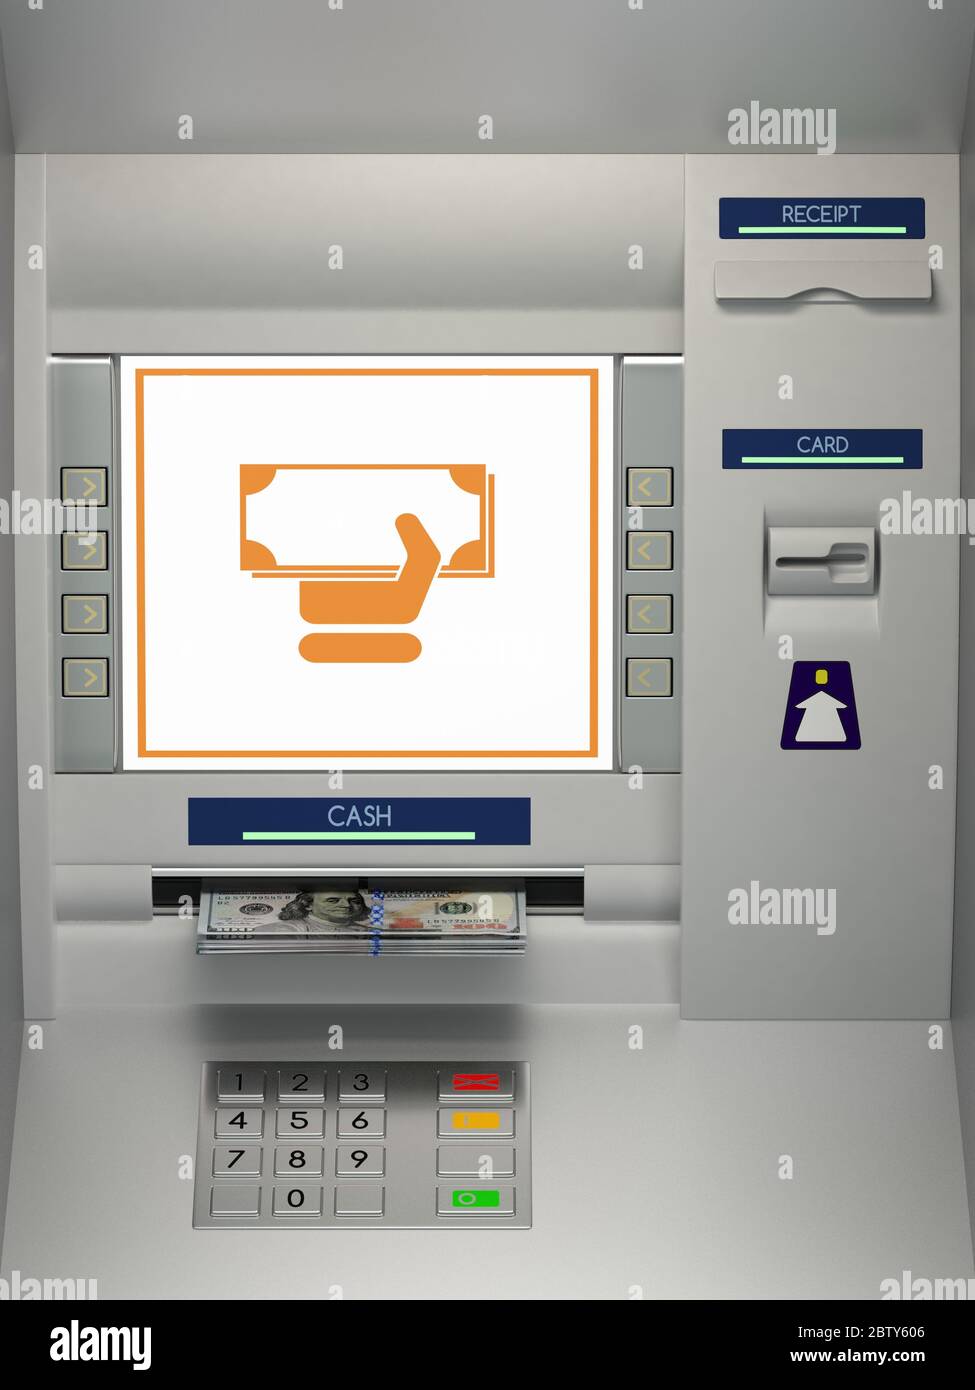 ATm machine with banknotes in the money slot Stock Photo